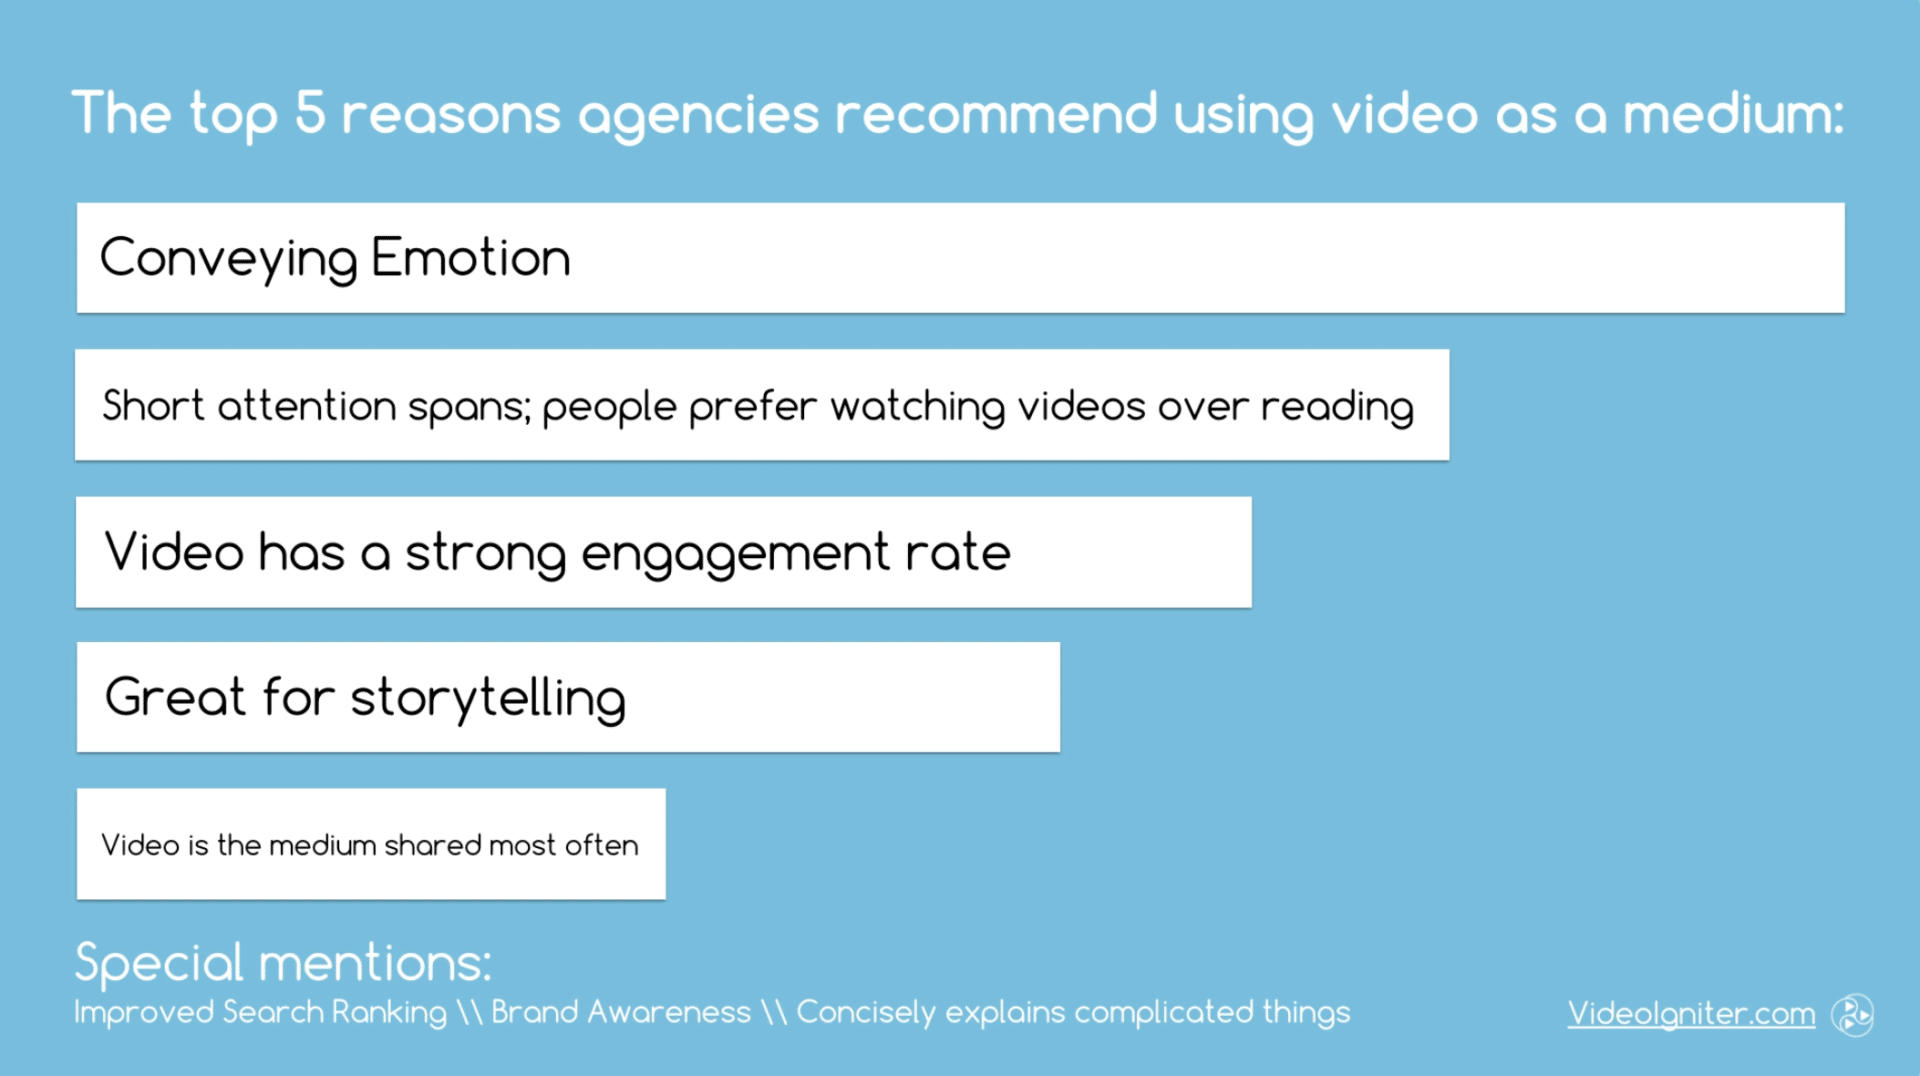 The top 5 reasons agencies recommend using video for marketing.